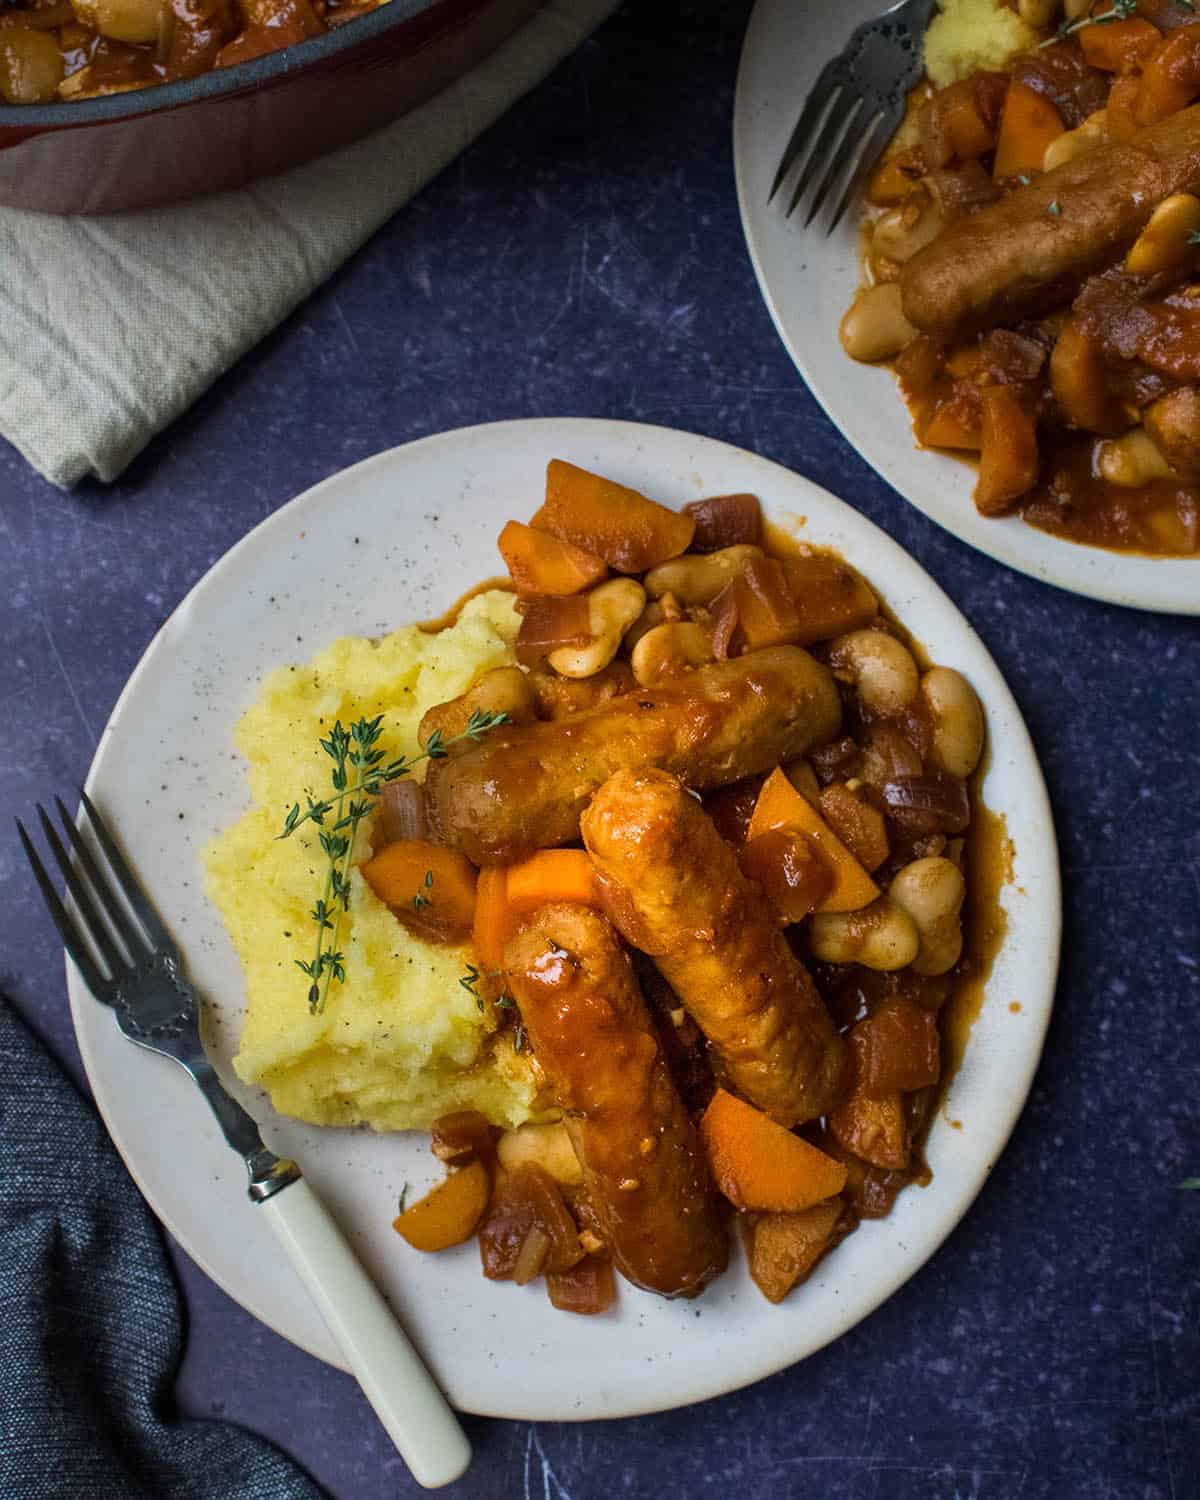 Top down view of vegan sausage casserole with a casserole dish